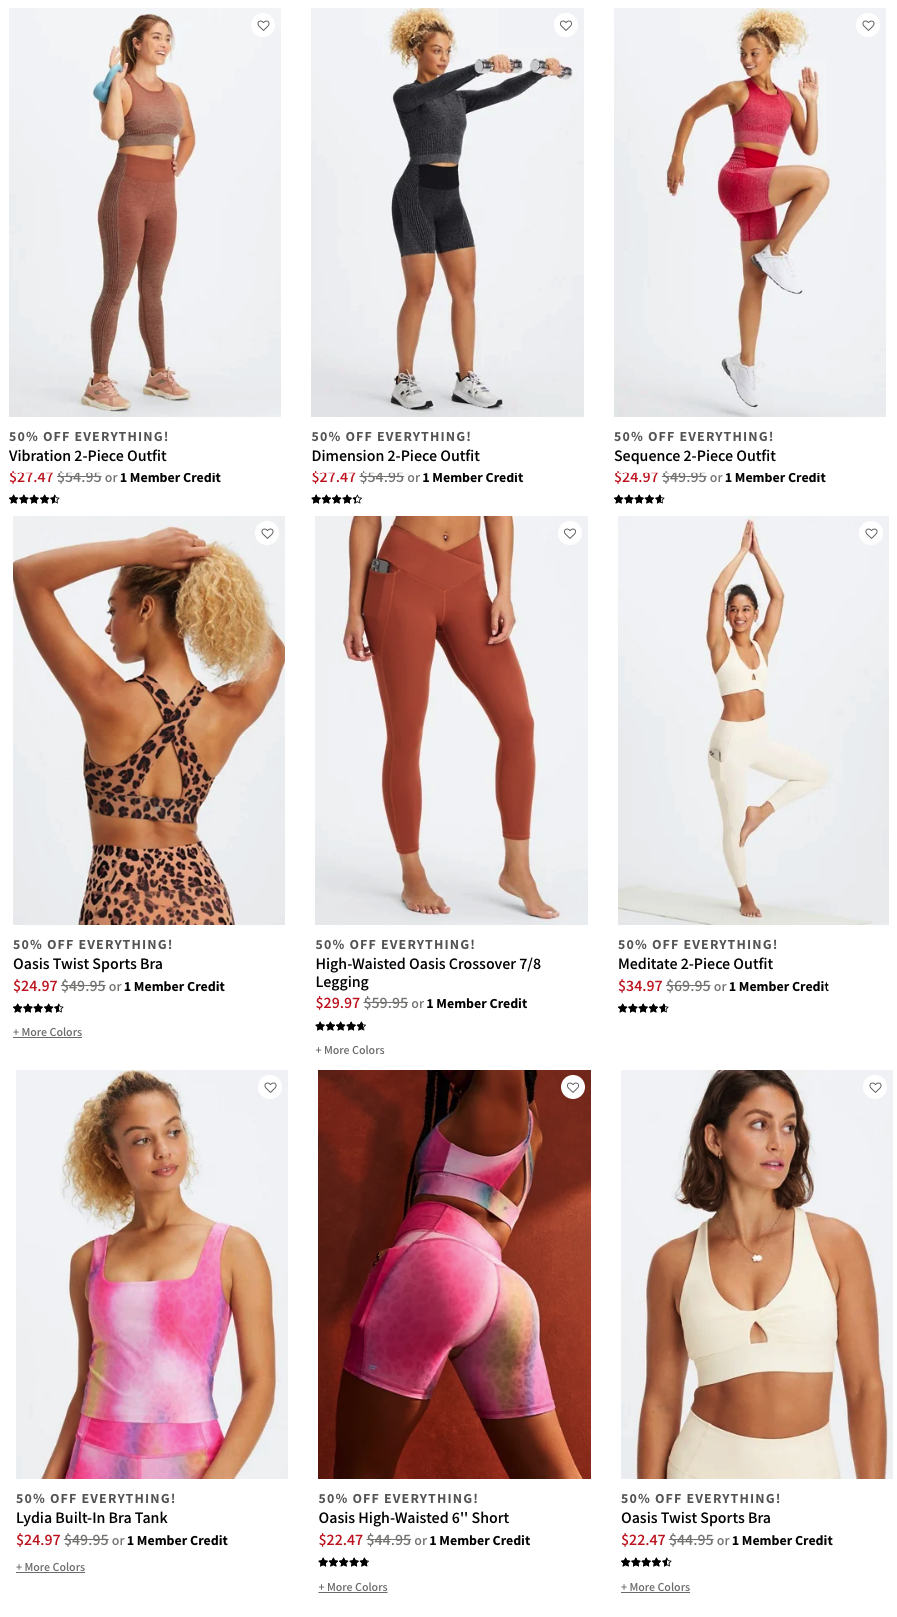 Fabletics Coupon: 2 Pairs of Leggings for $24 With VIP Membership